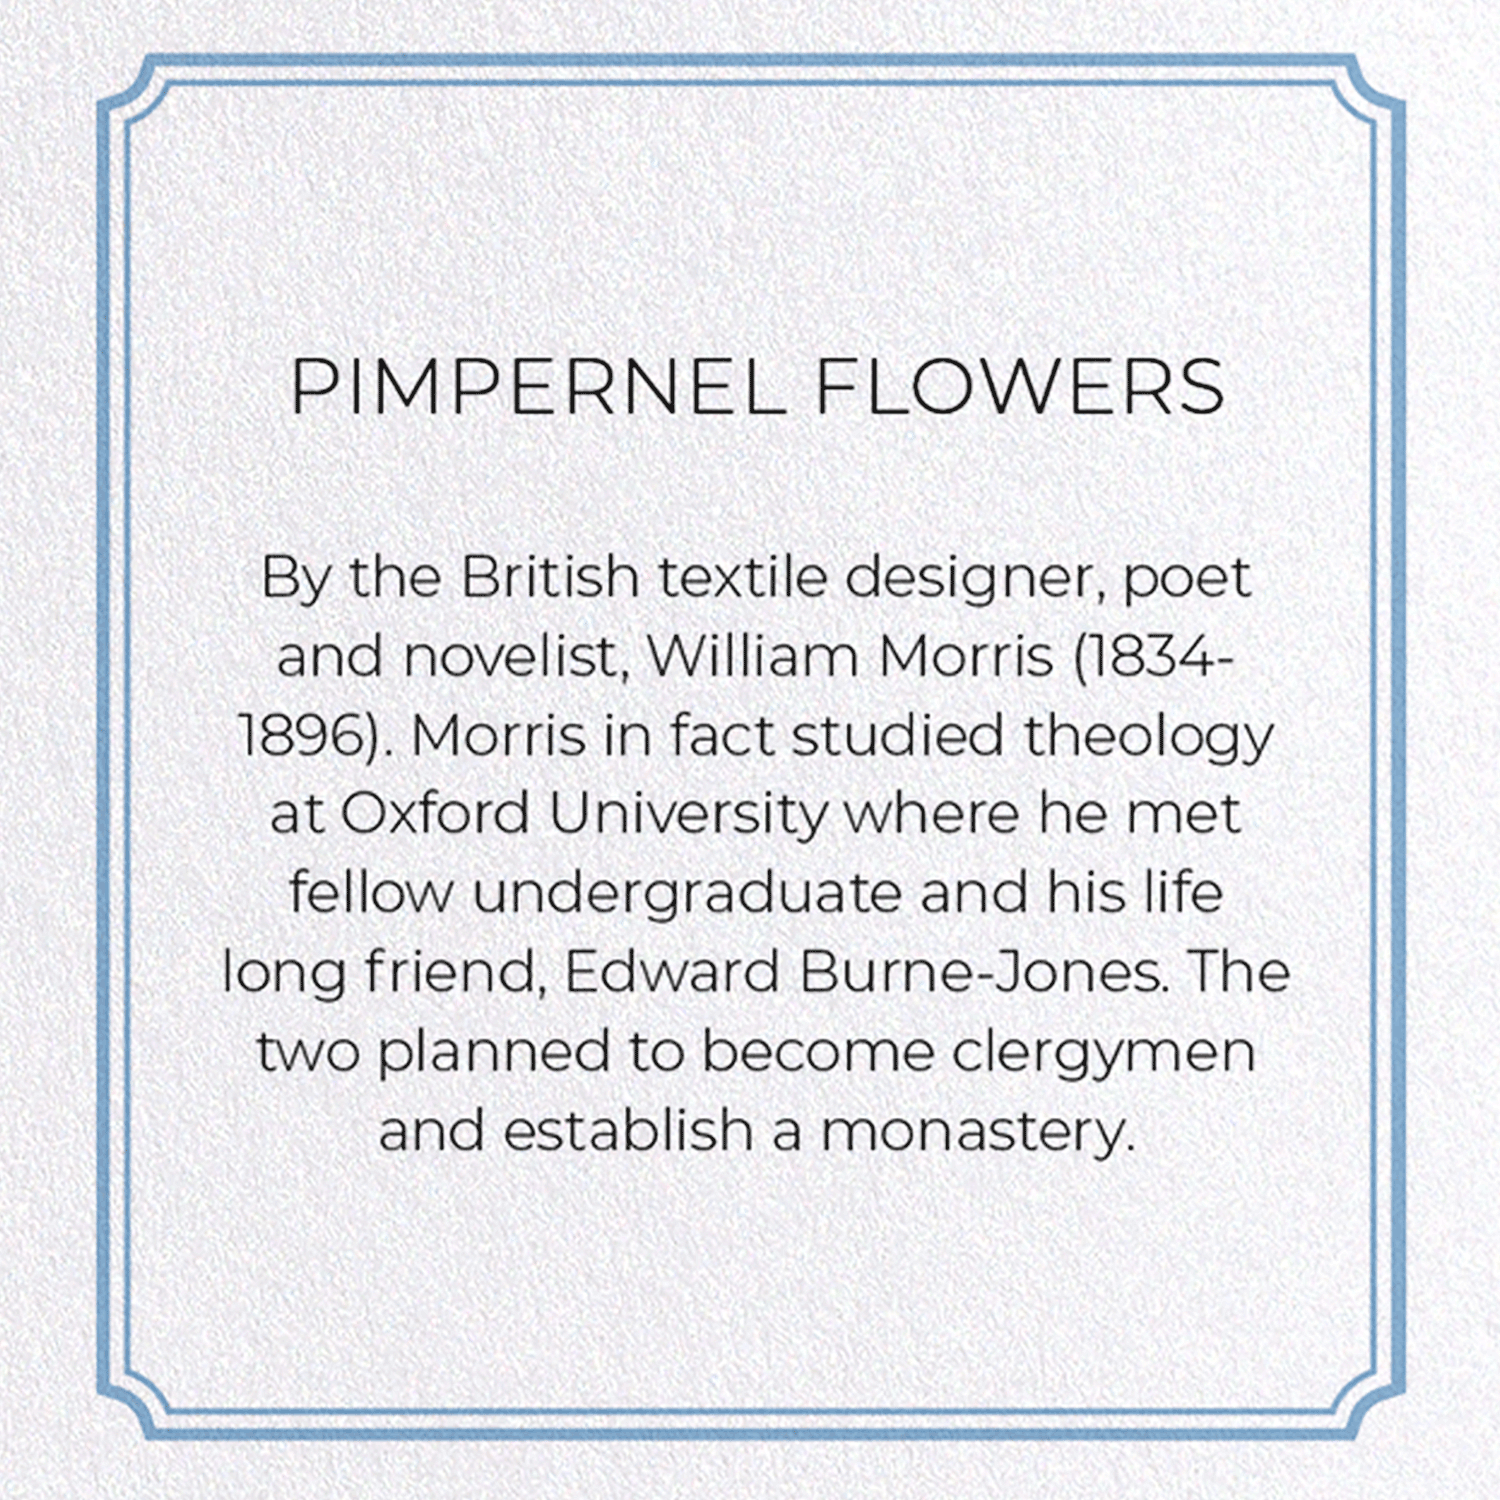 PIMPERNEL FLOWERS: Pattern Greeting Card